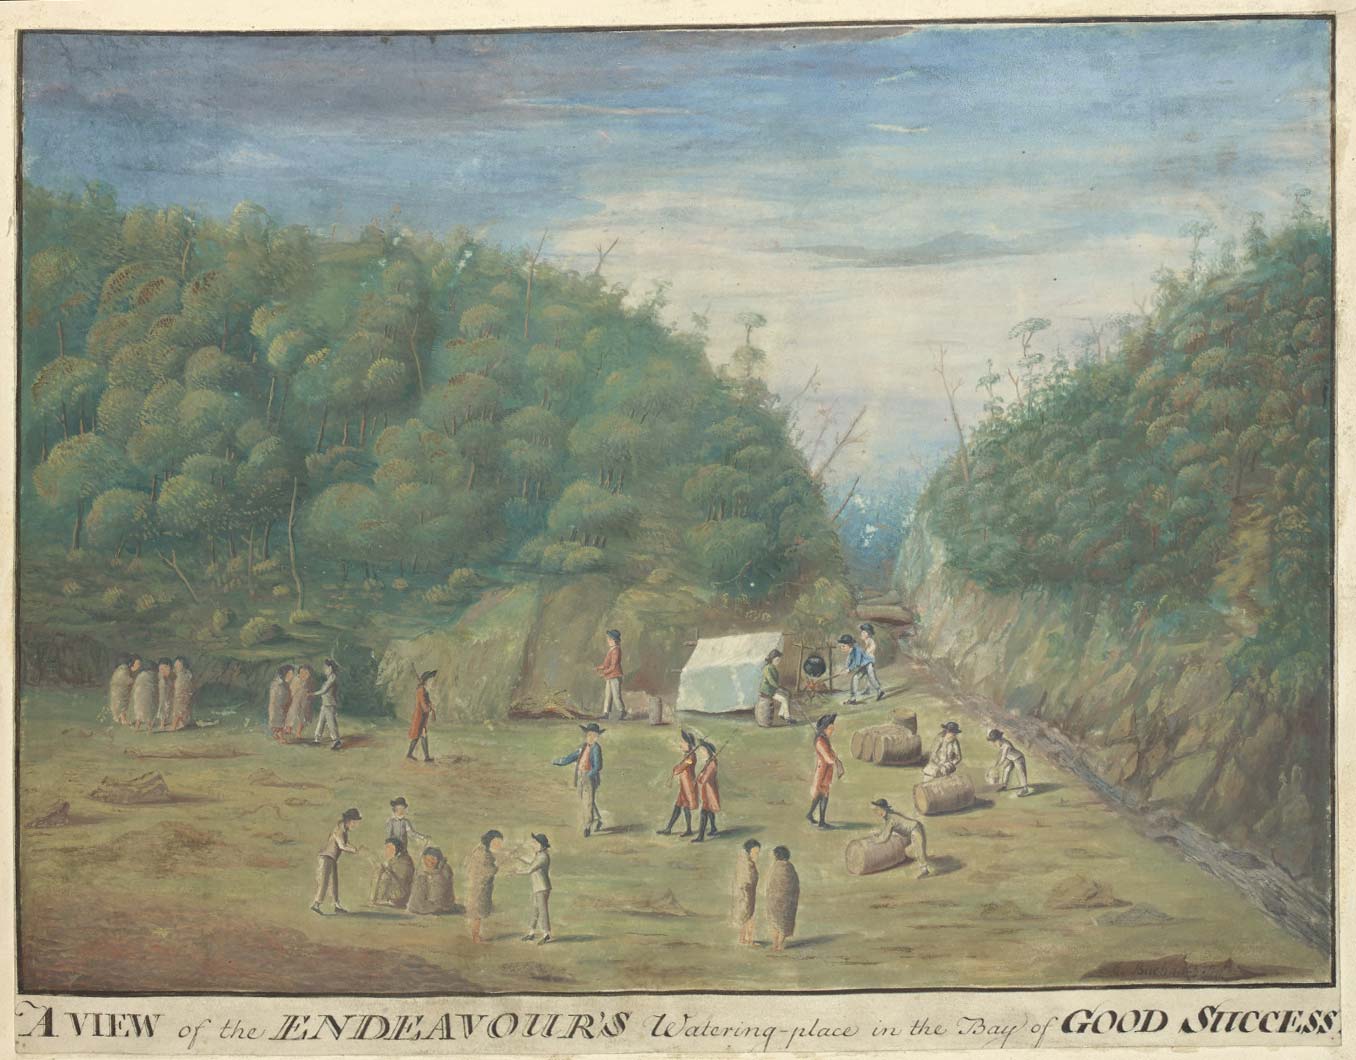 Colour print showing a group of men, some dressed in miltiary uniforms, others in sailor's attire, camped beside a small stream. Treed hillsides rise steeply on both sides. - click to view larger image